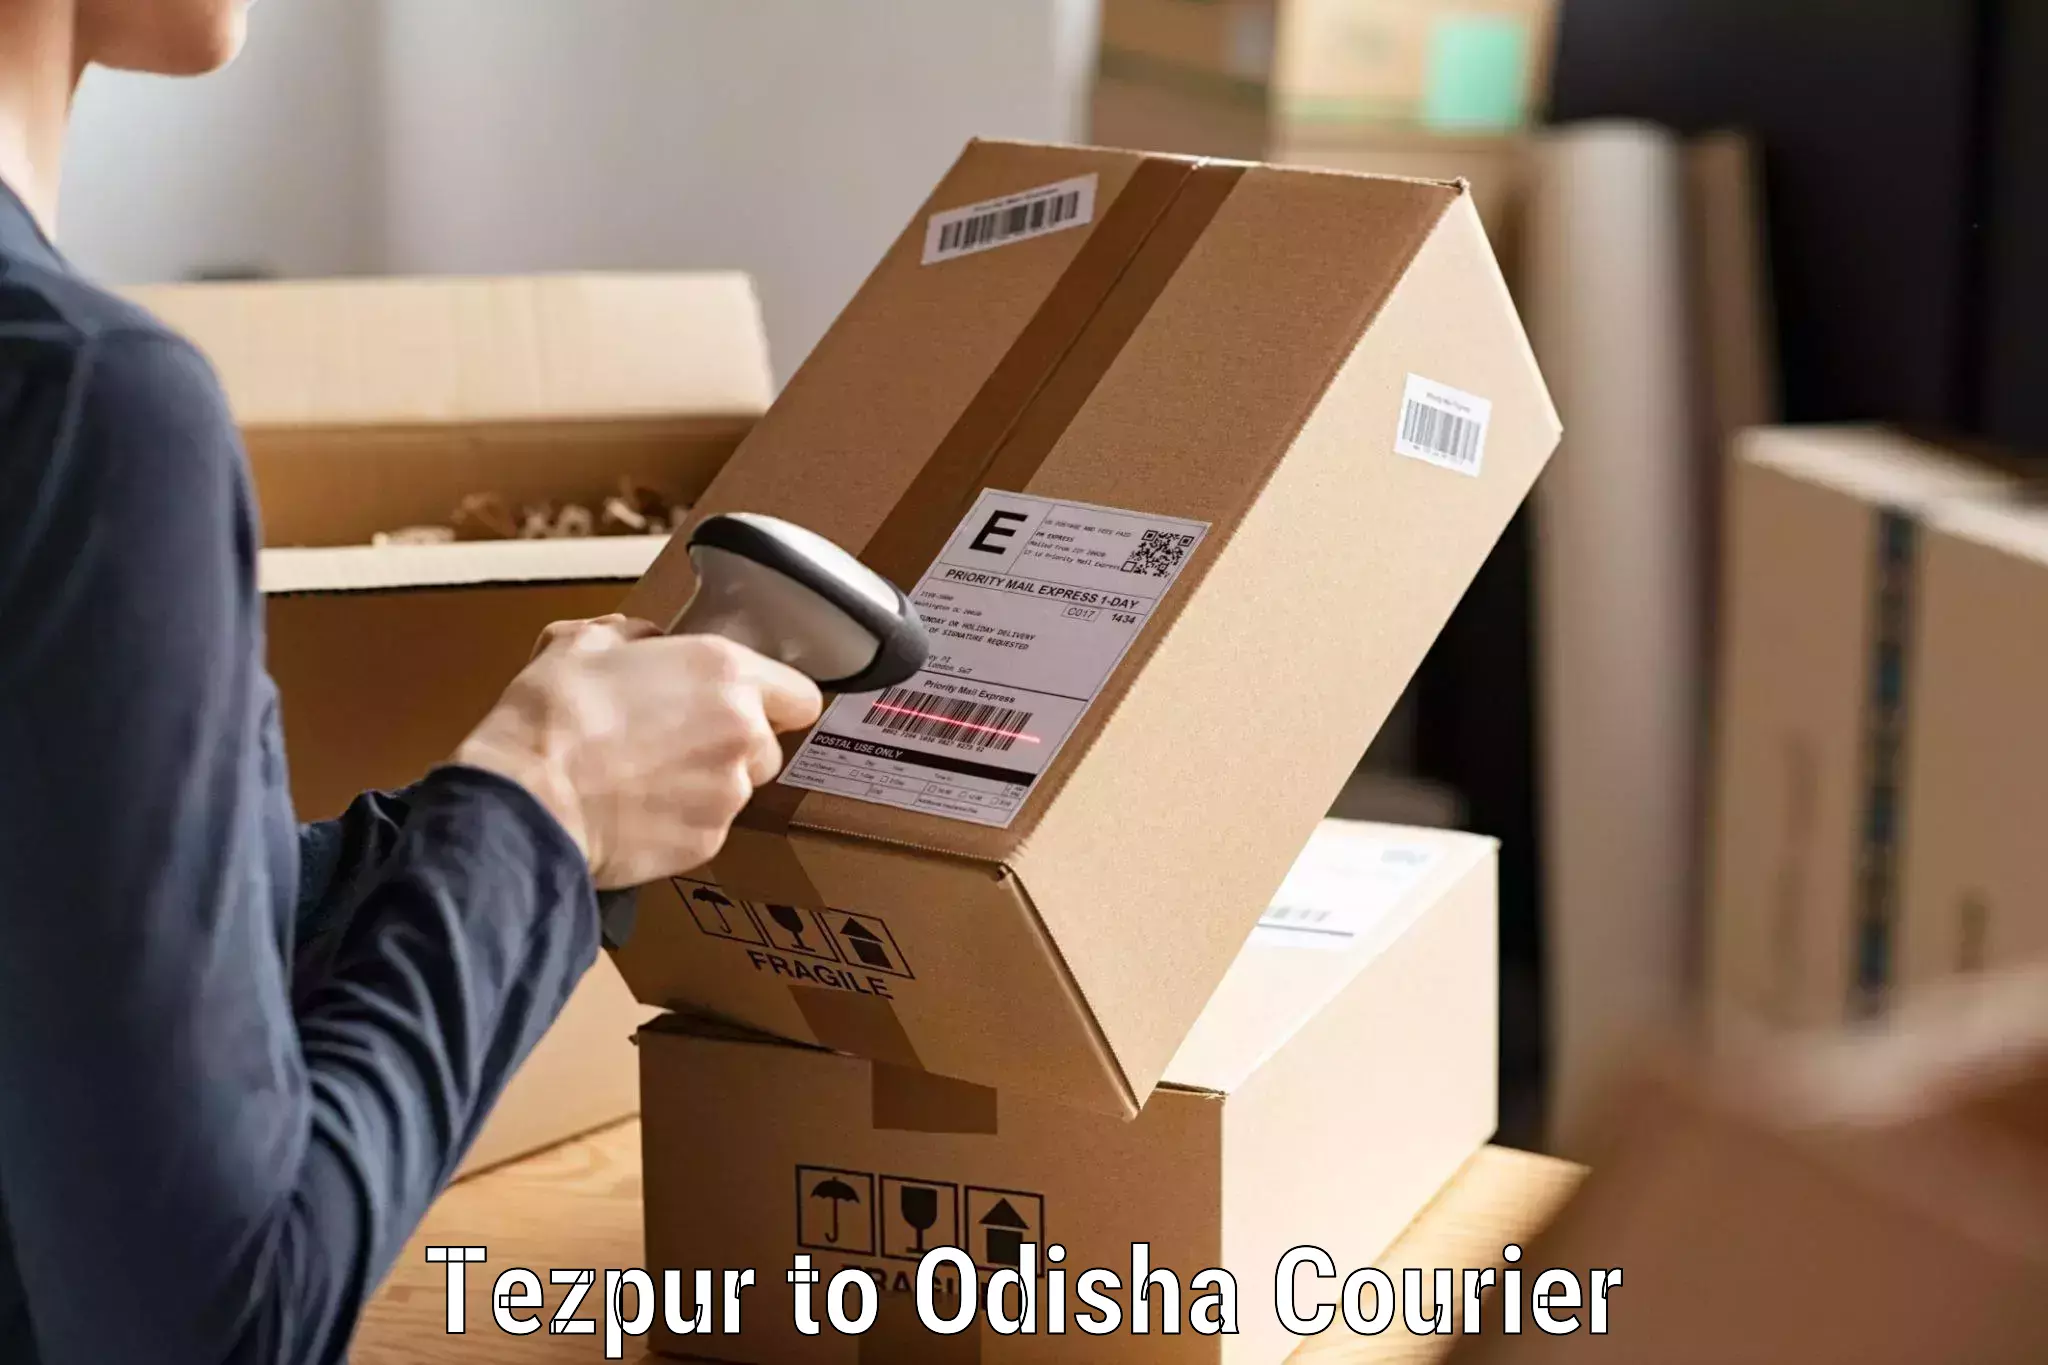 State-of-the-art courier technology Tezpur to Talcher